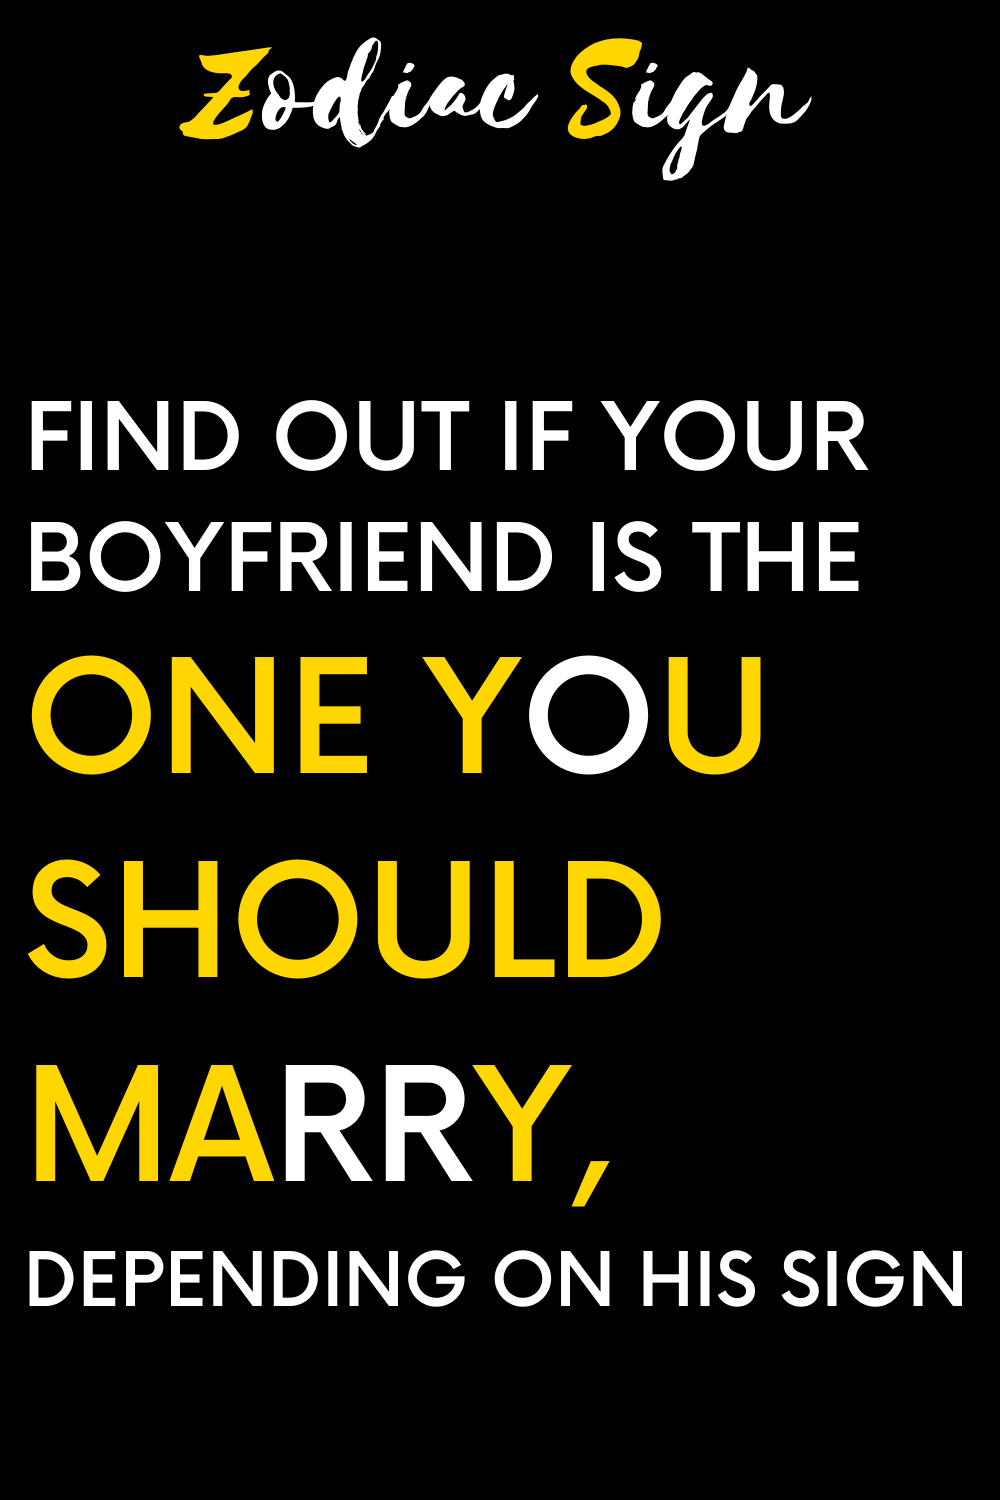 Find out if your boyfriend is the one you should marry, depending on his sign